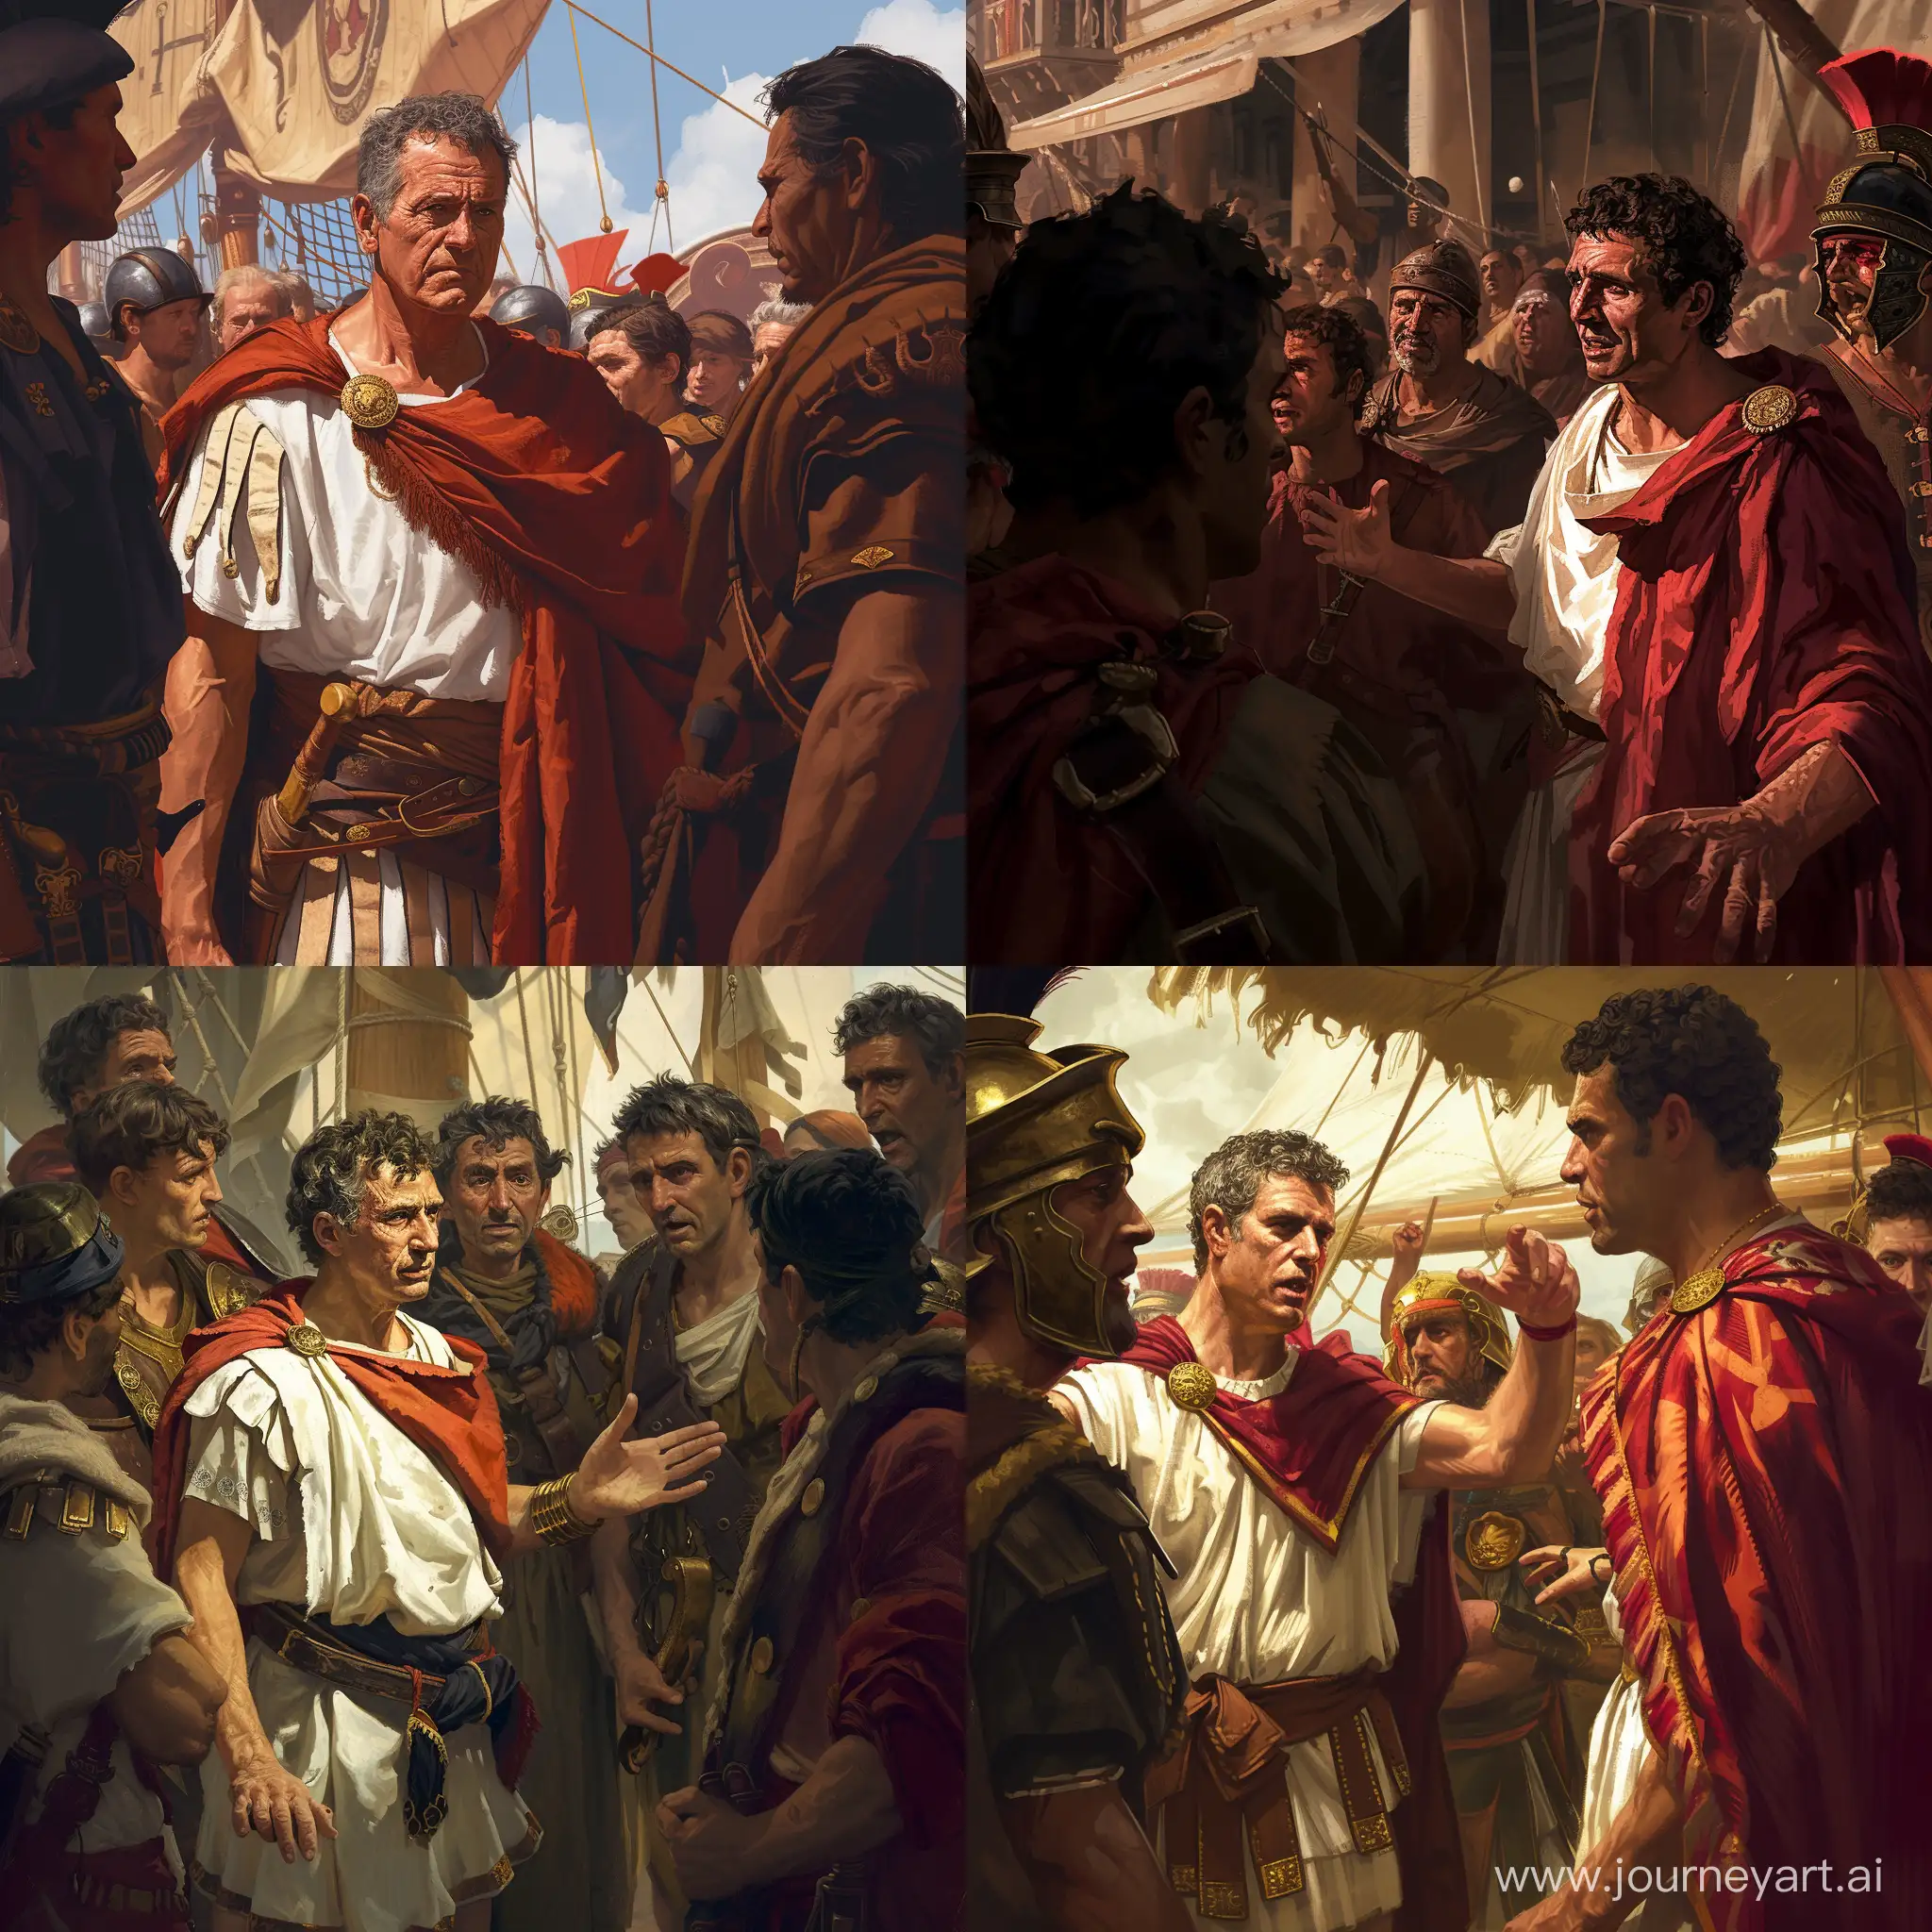 Illustrate the historic moment when julius caesar Insulted by the initial ransom demand confidentlydemands more talents from the pirates,adding a touch of his highhanded demeanor. Make the scene hyperrealistic